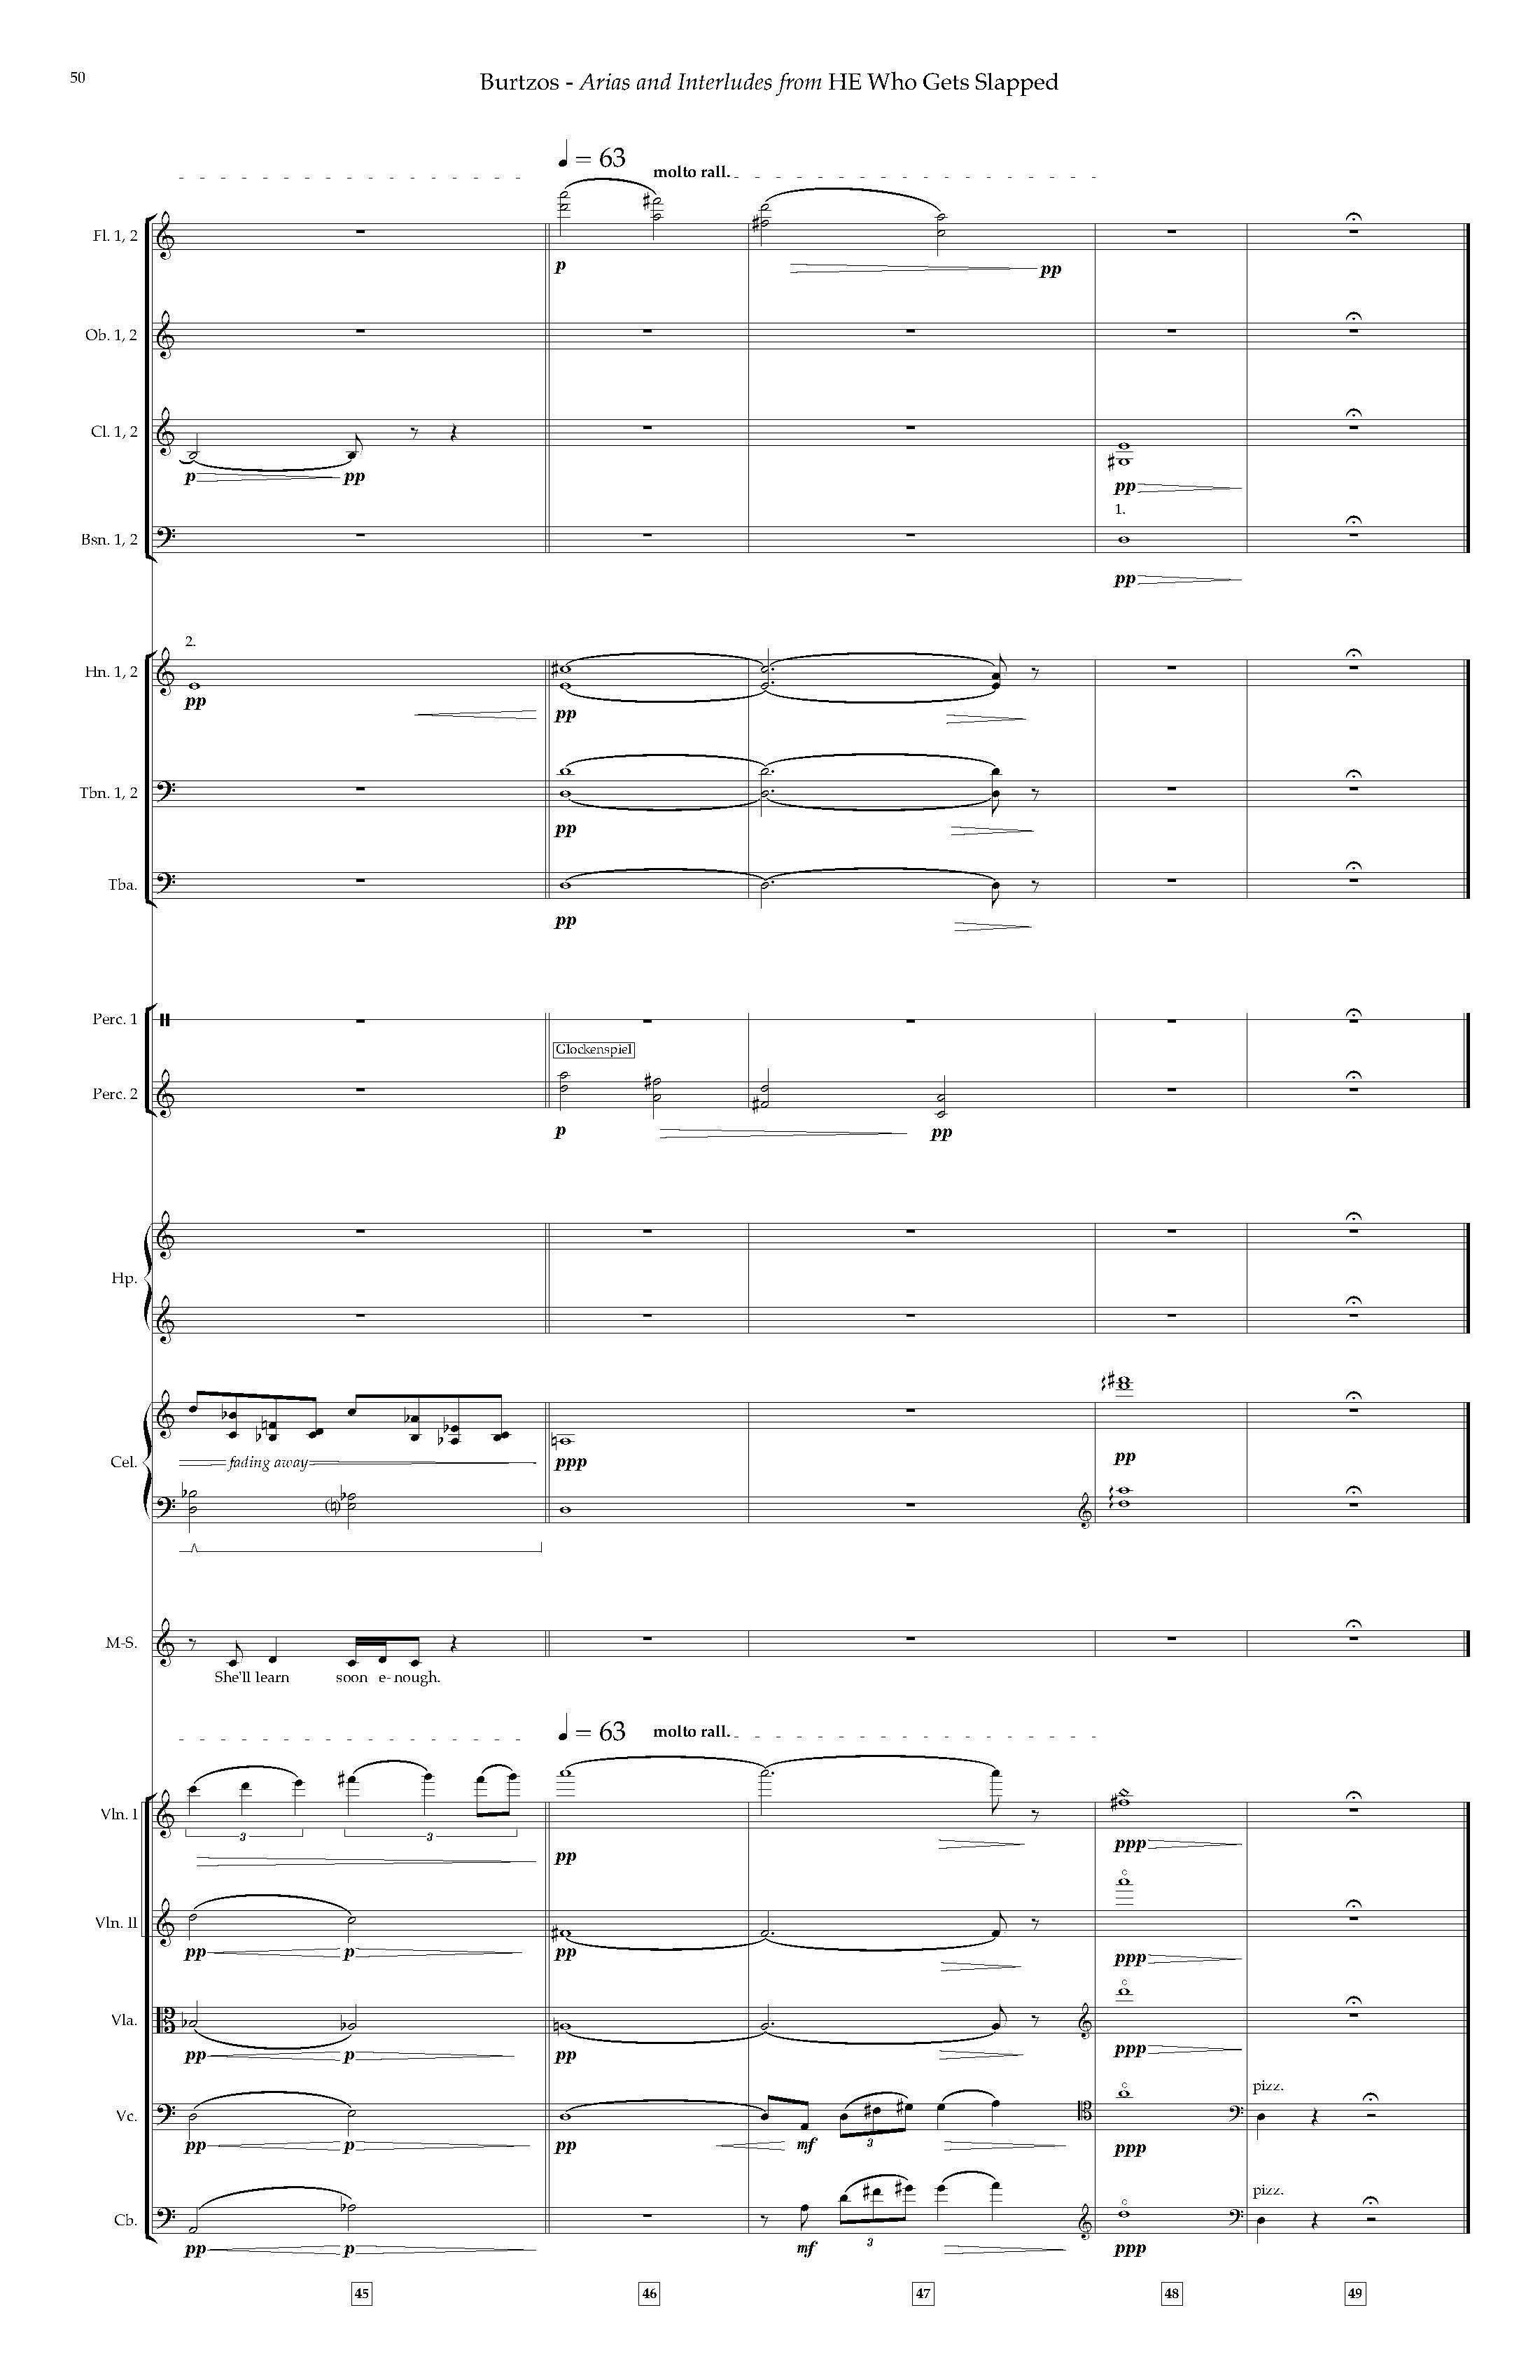 Arias and Interludes from HWGS - Complete Score_Page_56.jpg